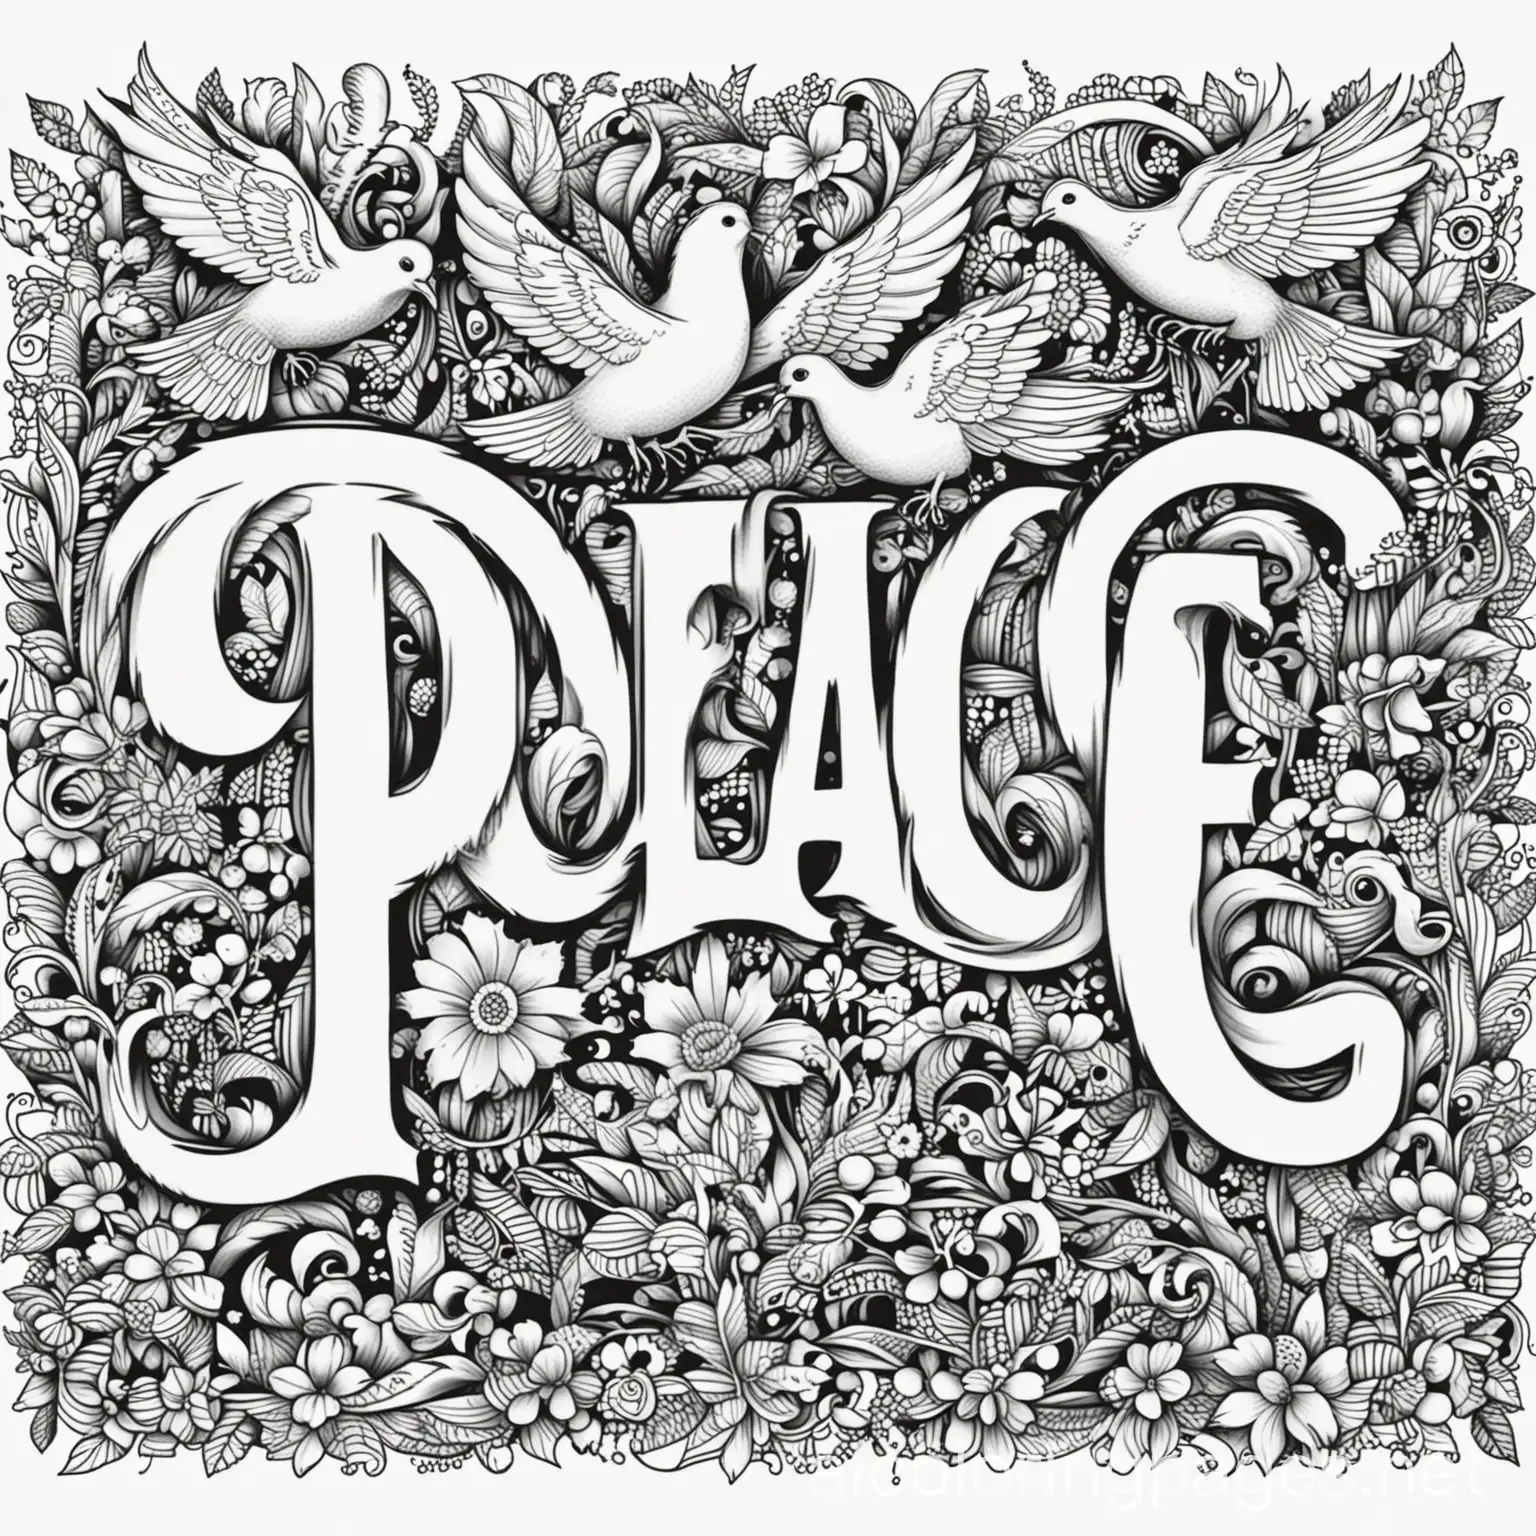 (coloring book) Design a coloring page centered around the word "Peace." Decorate the letters with whimsical elements like doves, stars, and flowers. Incorporate playful details within and around the letters to create an engaging and harmonious design., Coloring Page, black and white, line art, white background, Simplicity, Ample White Space. The background of the coloring page is plain white to make it easy for young children to color within the lines. The outlines of all the subjects are easy to distinguish, making it simple for kids to color without too much difficulty